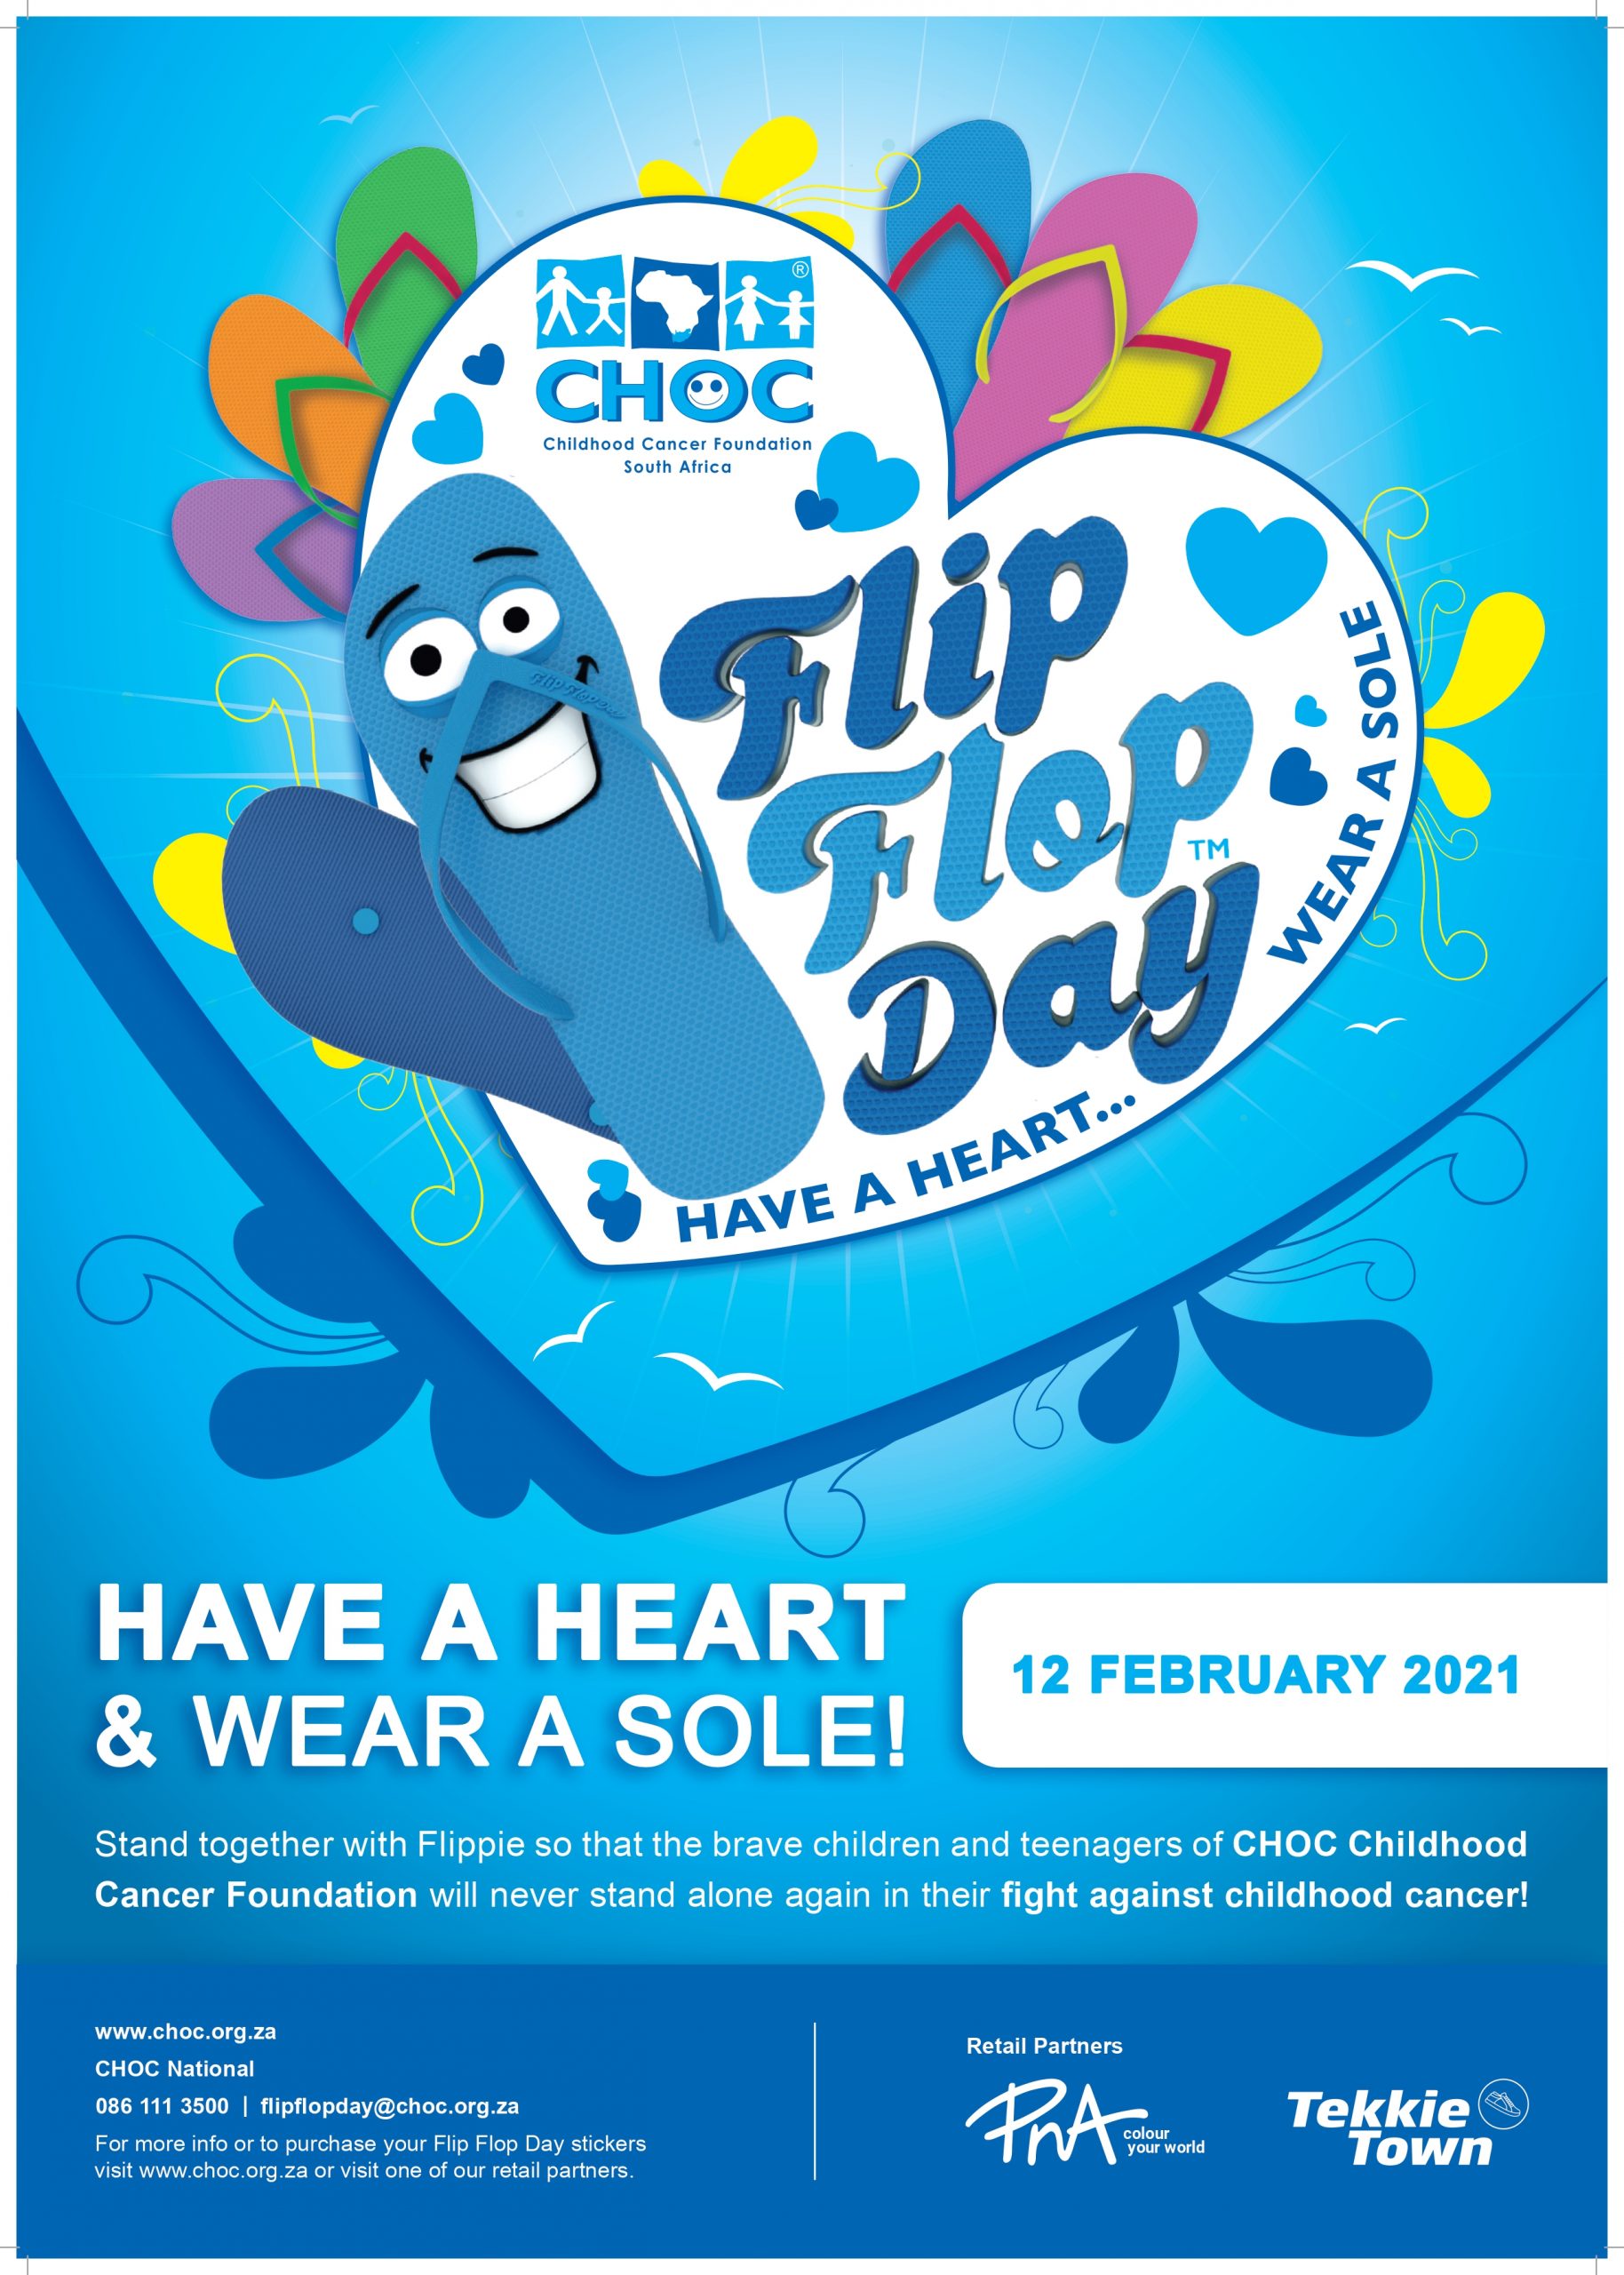 CHOC Childhood Cancer Association Flip Flop Day 2021 – Have a Heart and Wear a Sole!